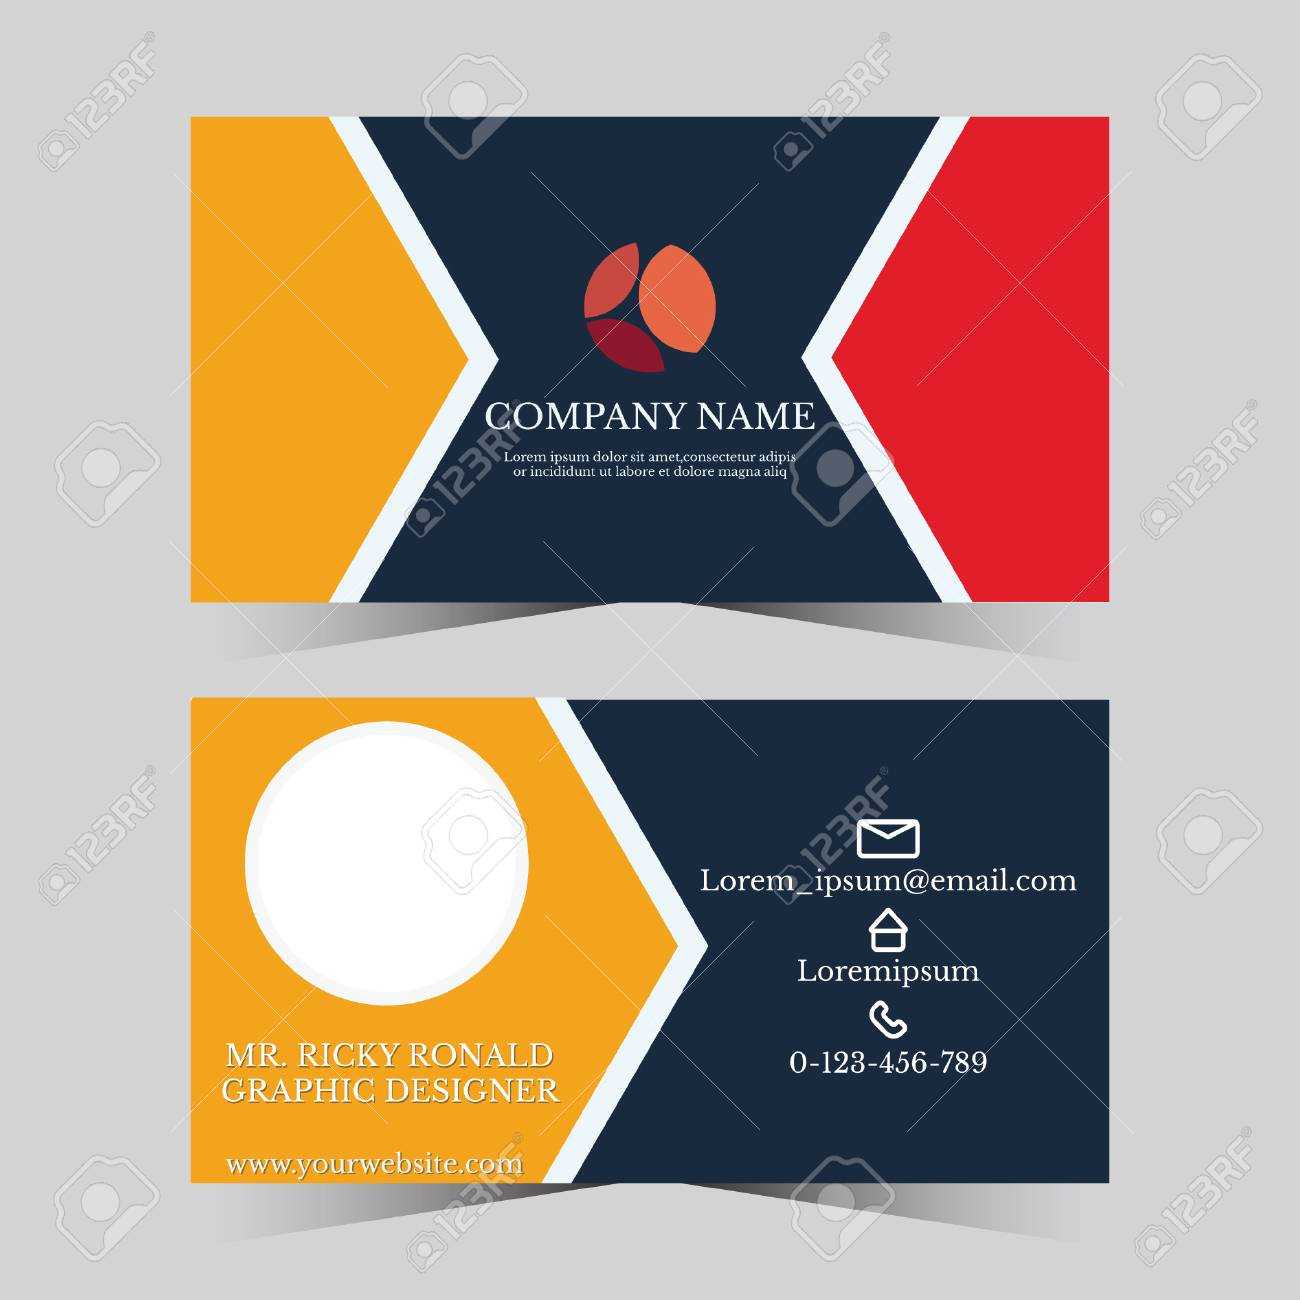 Calling Card Template For Business Man With Geometric Design Pertaining To Template For Calling Card